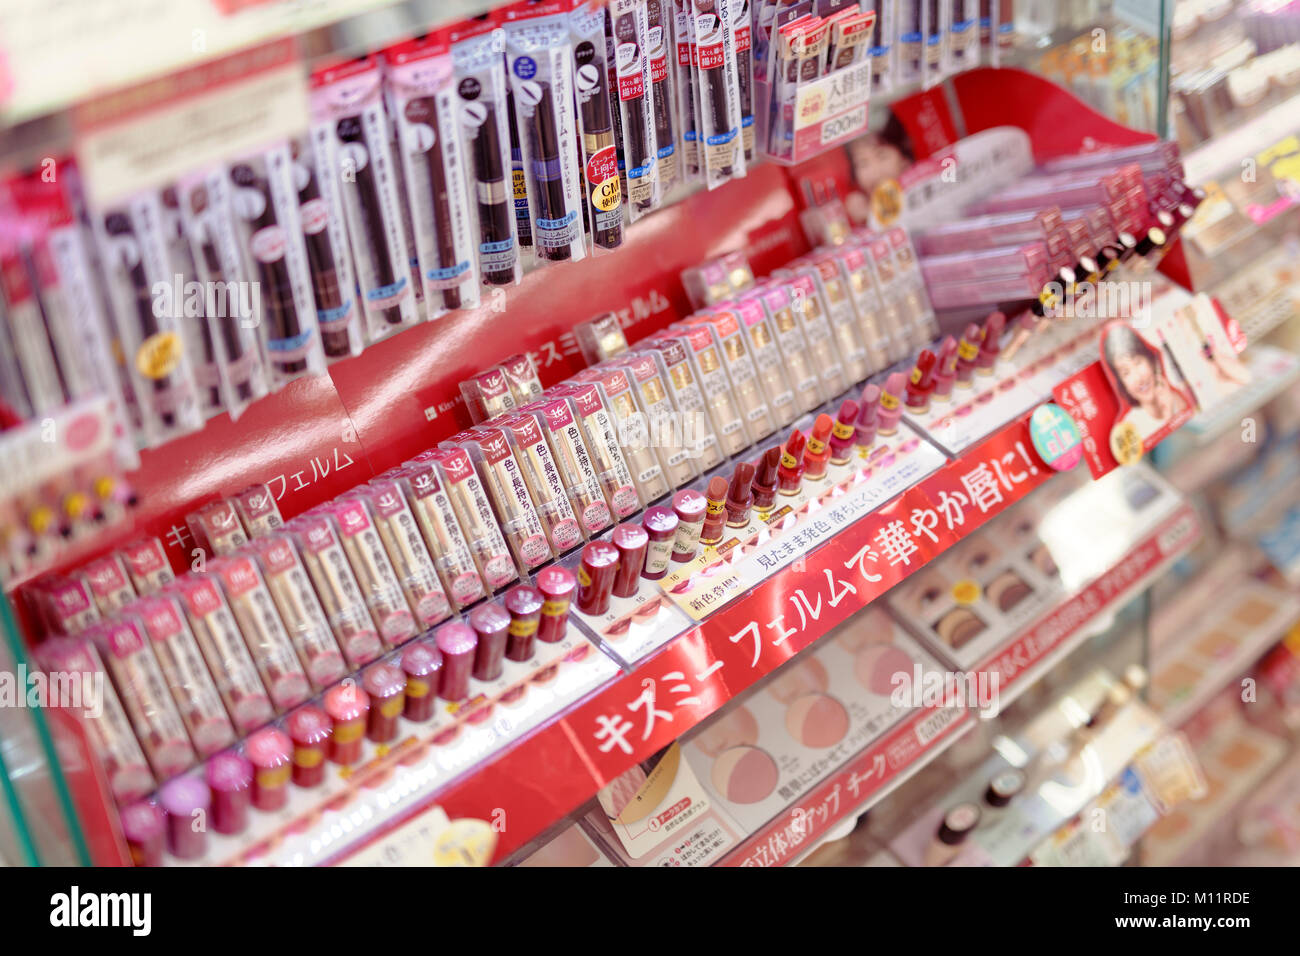 Shades of red and pink lipsticks in a Japanese makeup and beauty product store, lipstick testers on make-up store display, Kyoto, Japan 2017 Stock Photo